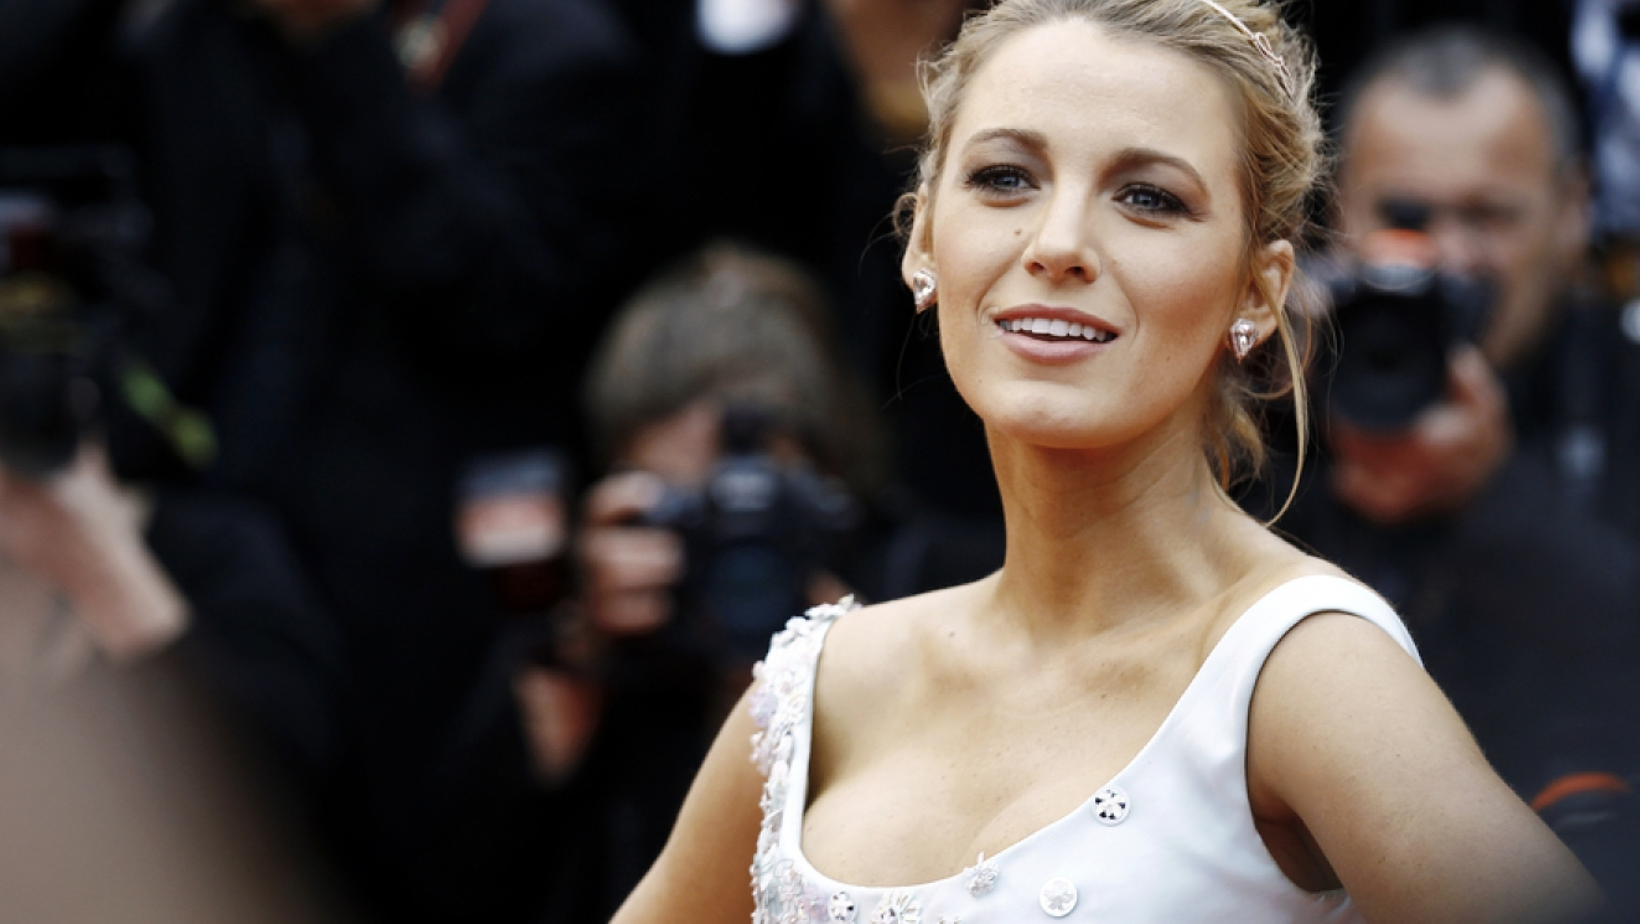 The Shocking Truth About Blake Lively’s Engagement Ring– The $2M Ring Everybody’s Buzzing About